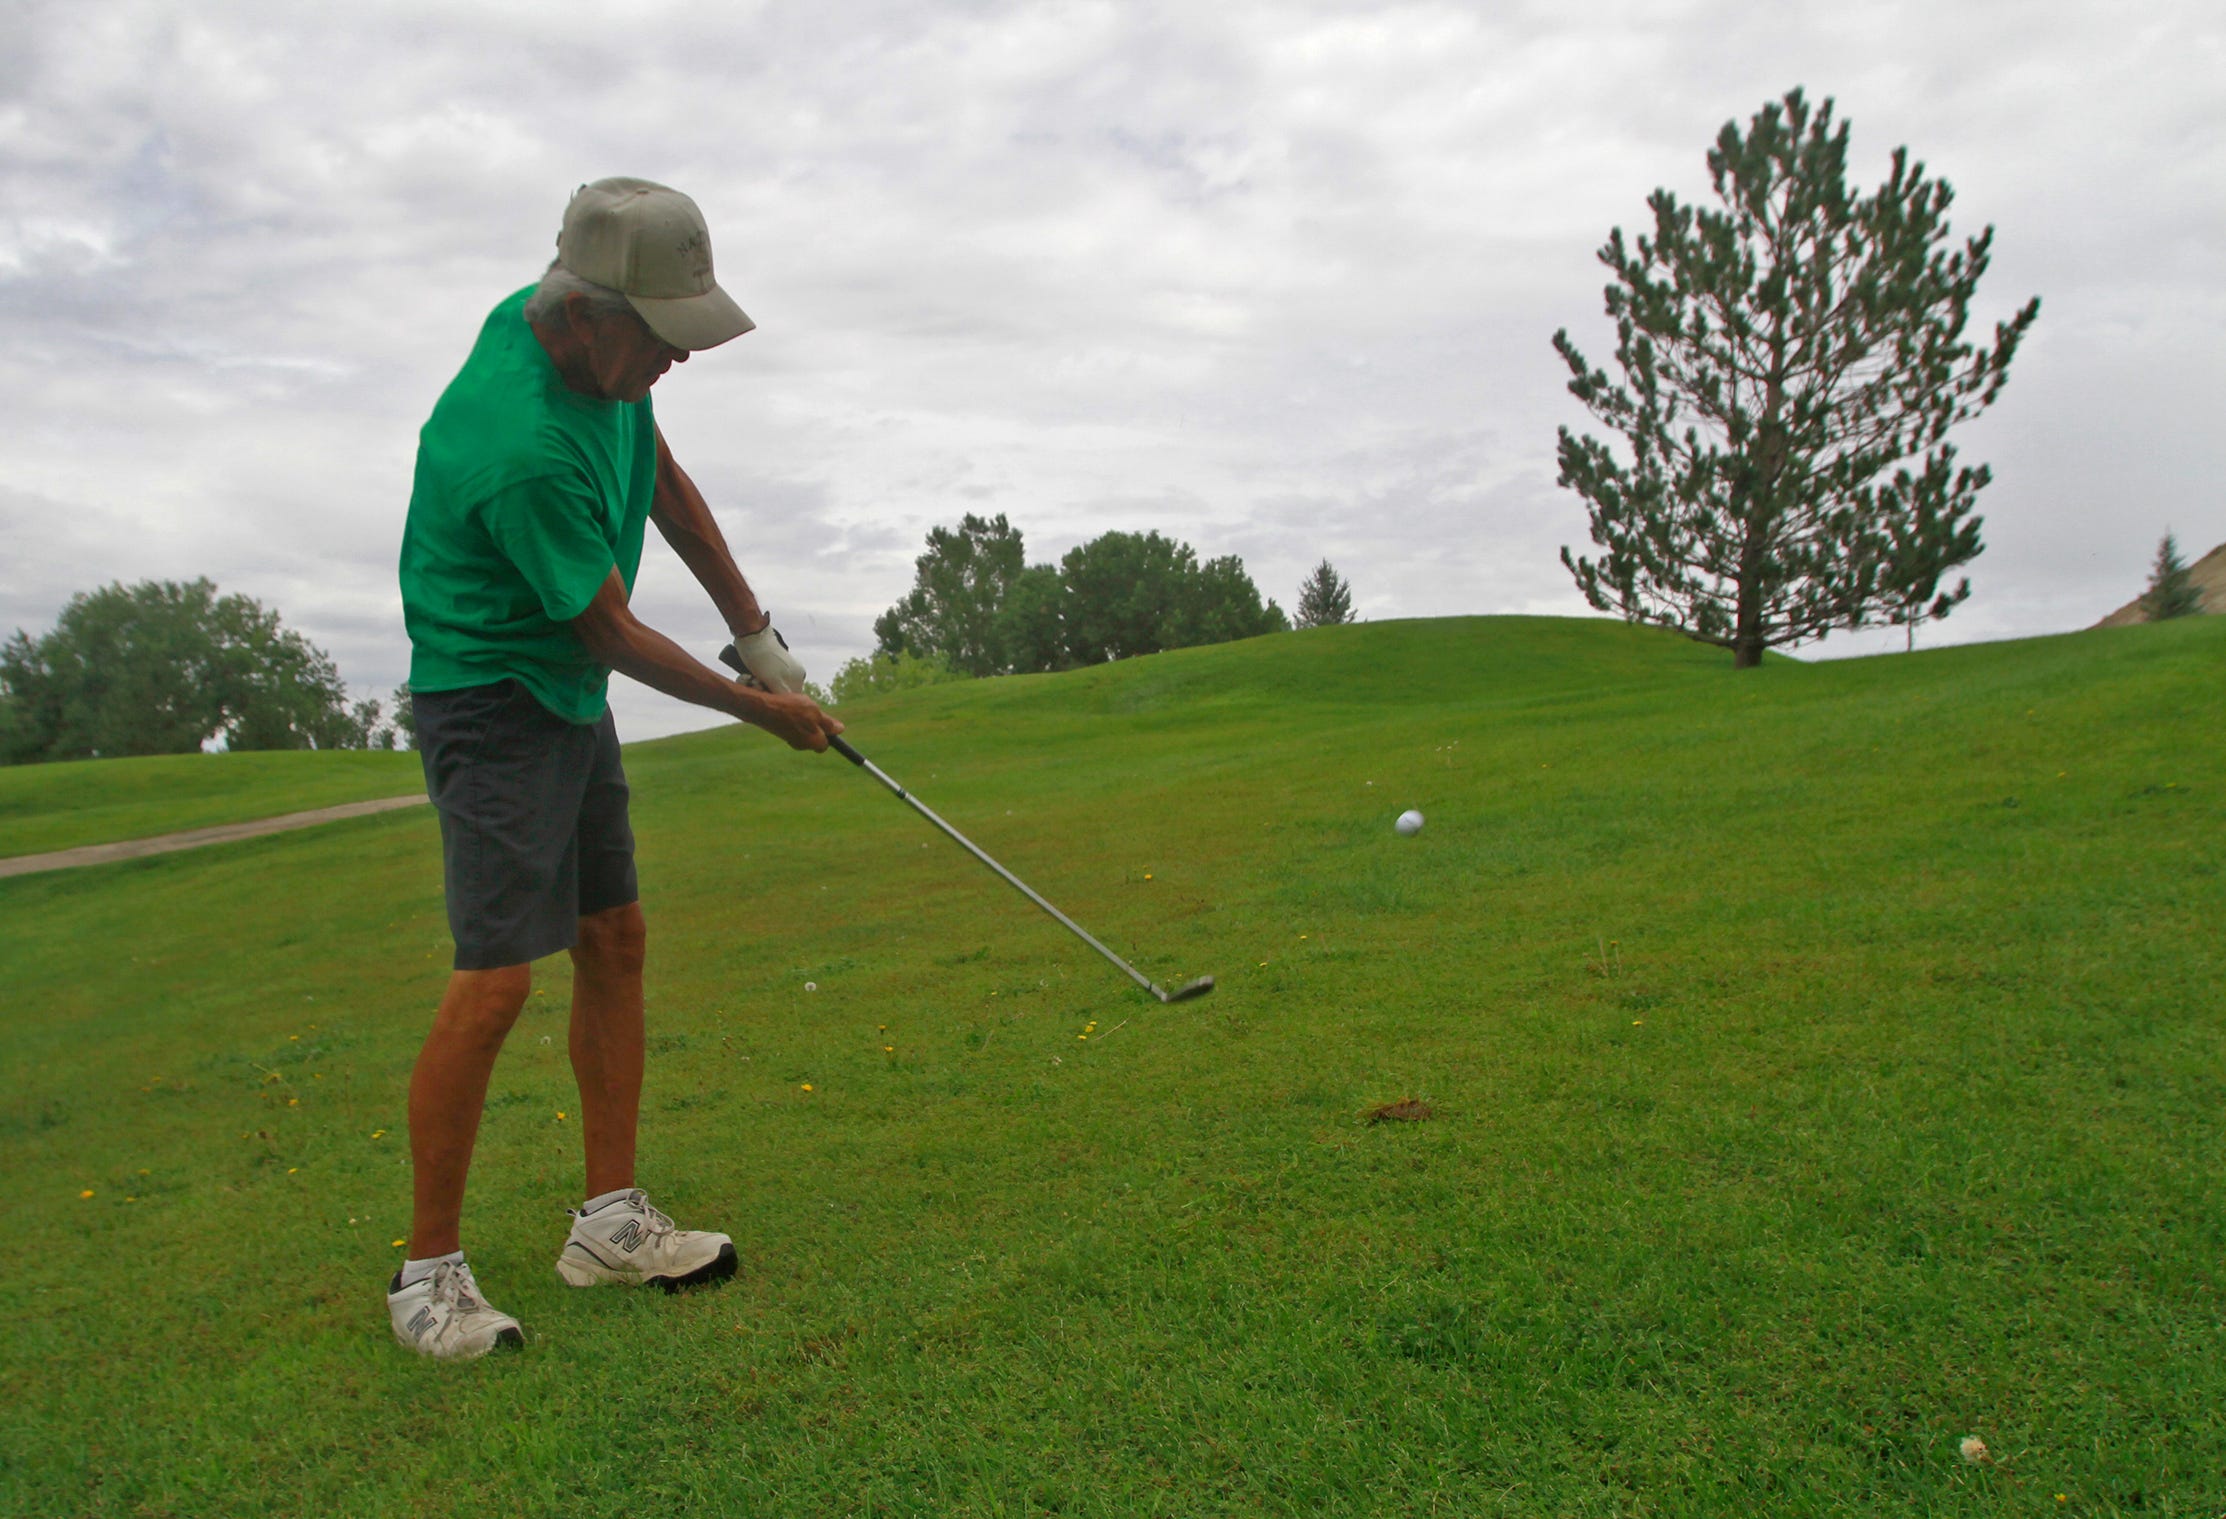 Pete McKinnon hits his ball, Thursday, Aug. 18, 2016 during a golf game at Aztec Municipal Golf Course in this file photo. The course could close by the end of the year.